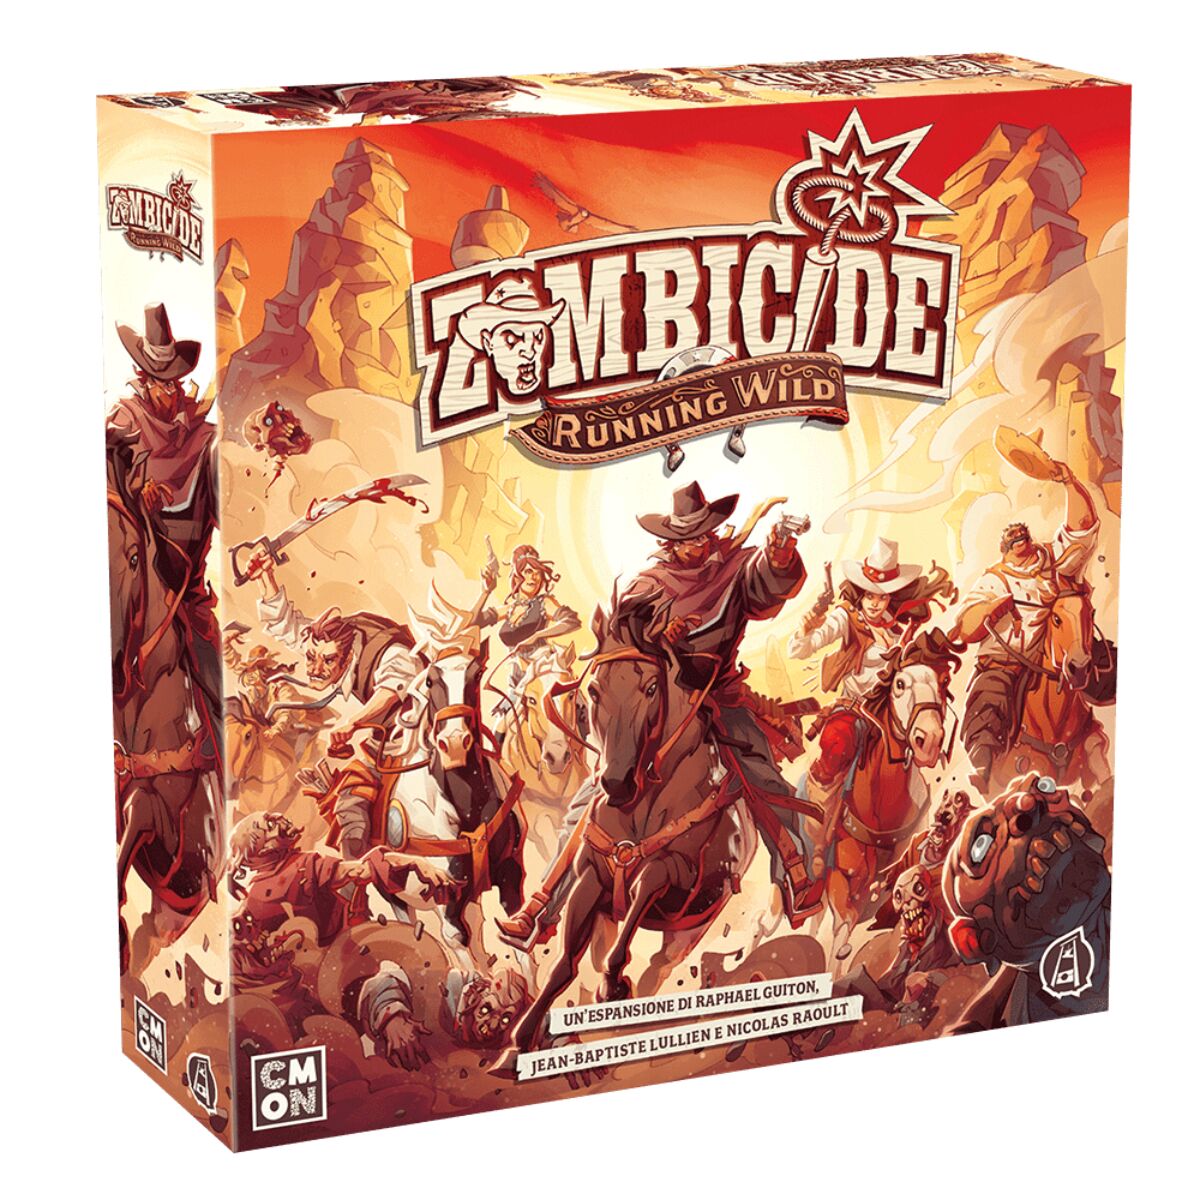 Running Wild - Zombicide Undead or Alive espansione